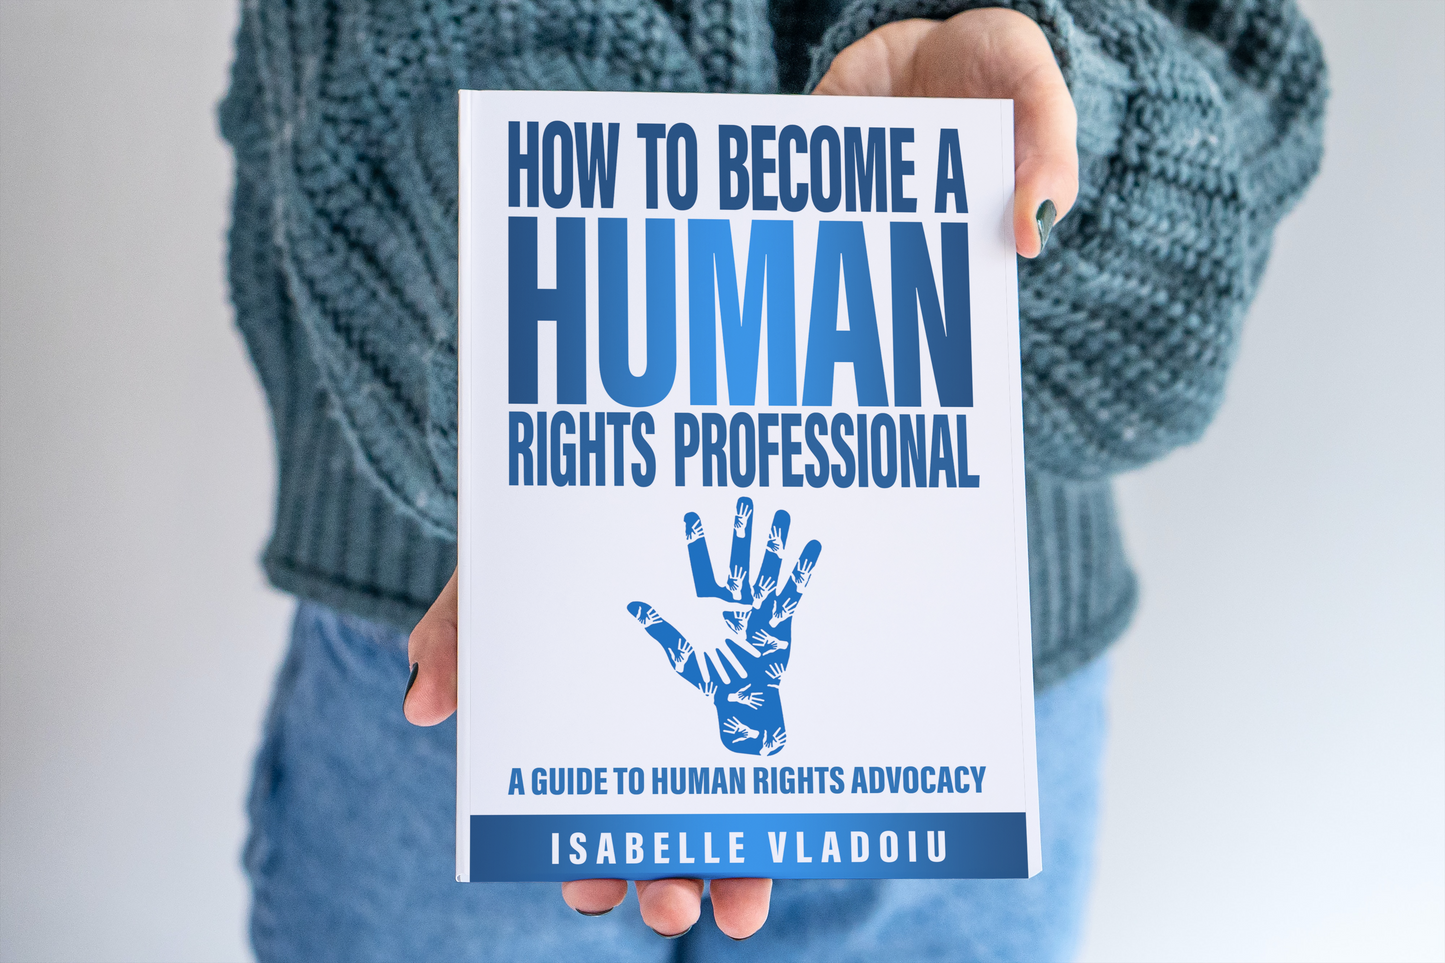 How to Become a Human Rights Professional: A Guide to Human Rights Advocacy